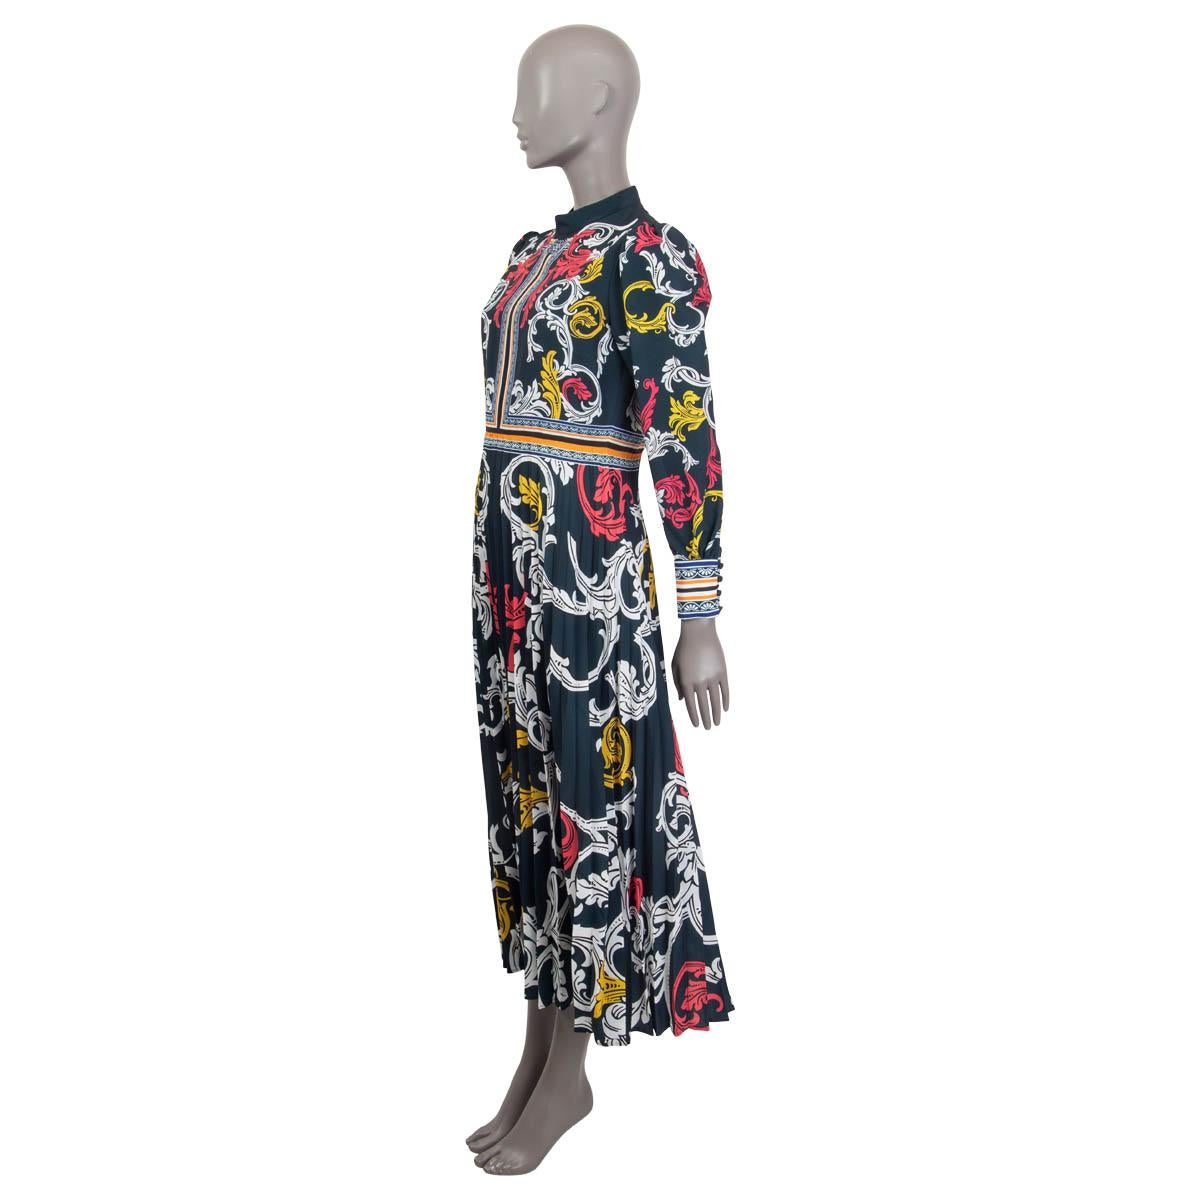 100% authentic Mary Katrantzou pleated maxi dress in midnight petrol, white, pink and yellow polyester (100%). Features long sleeves, a high neck and buttoned cuffs. Opens with a concealed zipper and two buttons on the back. Lined in midnight blue